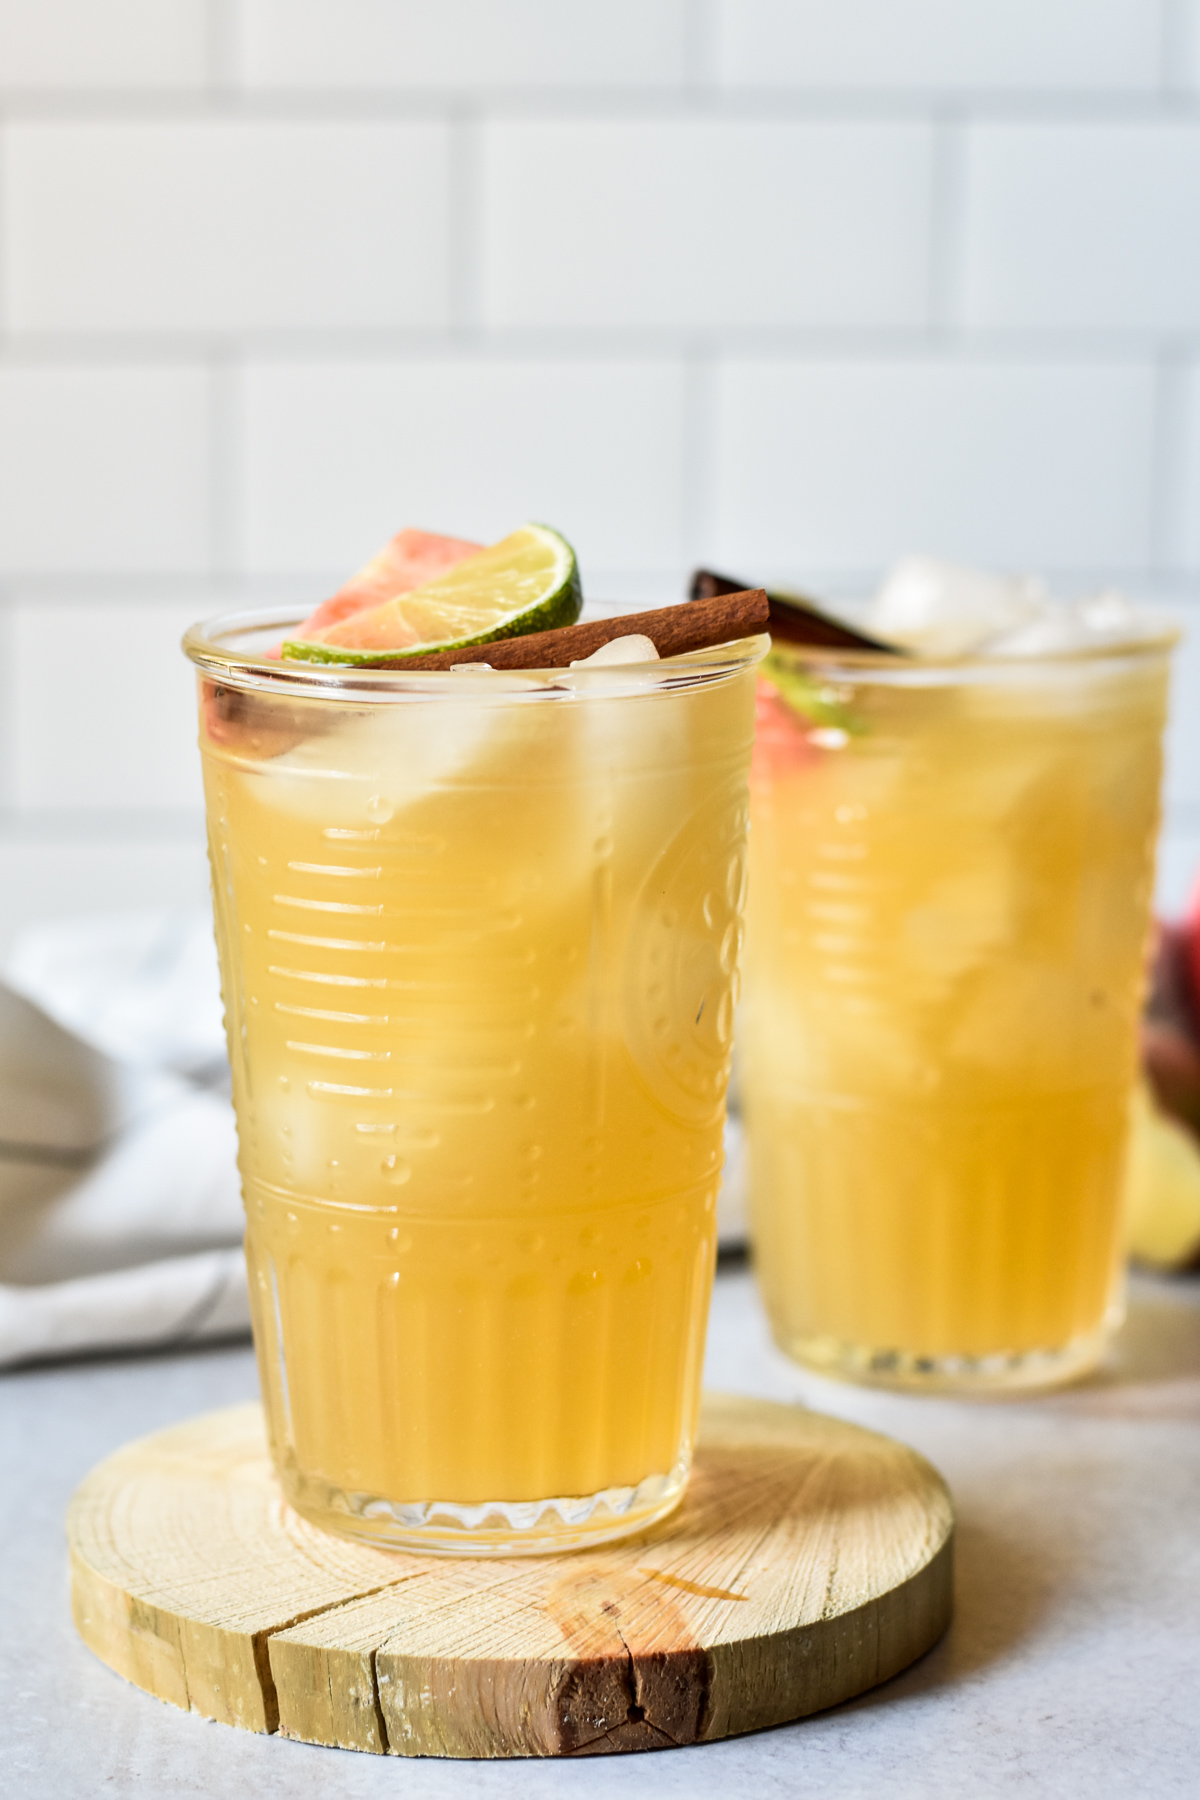 bourbon apple ginger fizz cocktails with lime and cinnamon stick